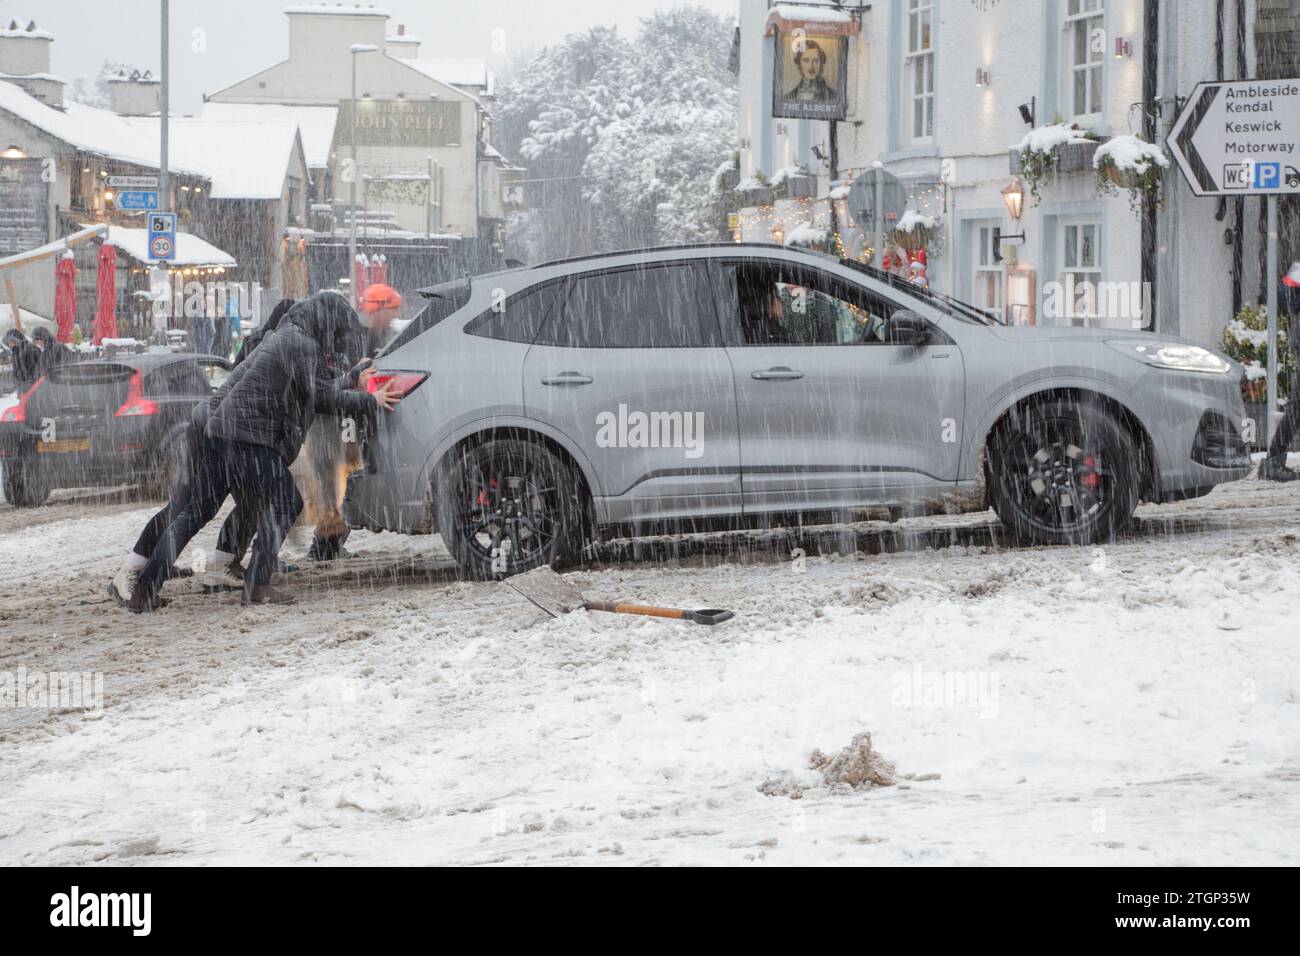 Members of the public push a stranded car up an incline during a snowstorm in Windermere, Lake District Stock Photo